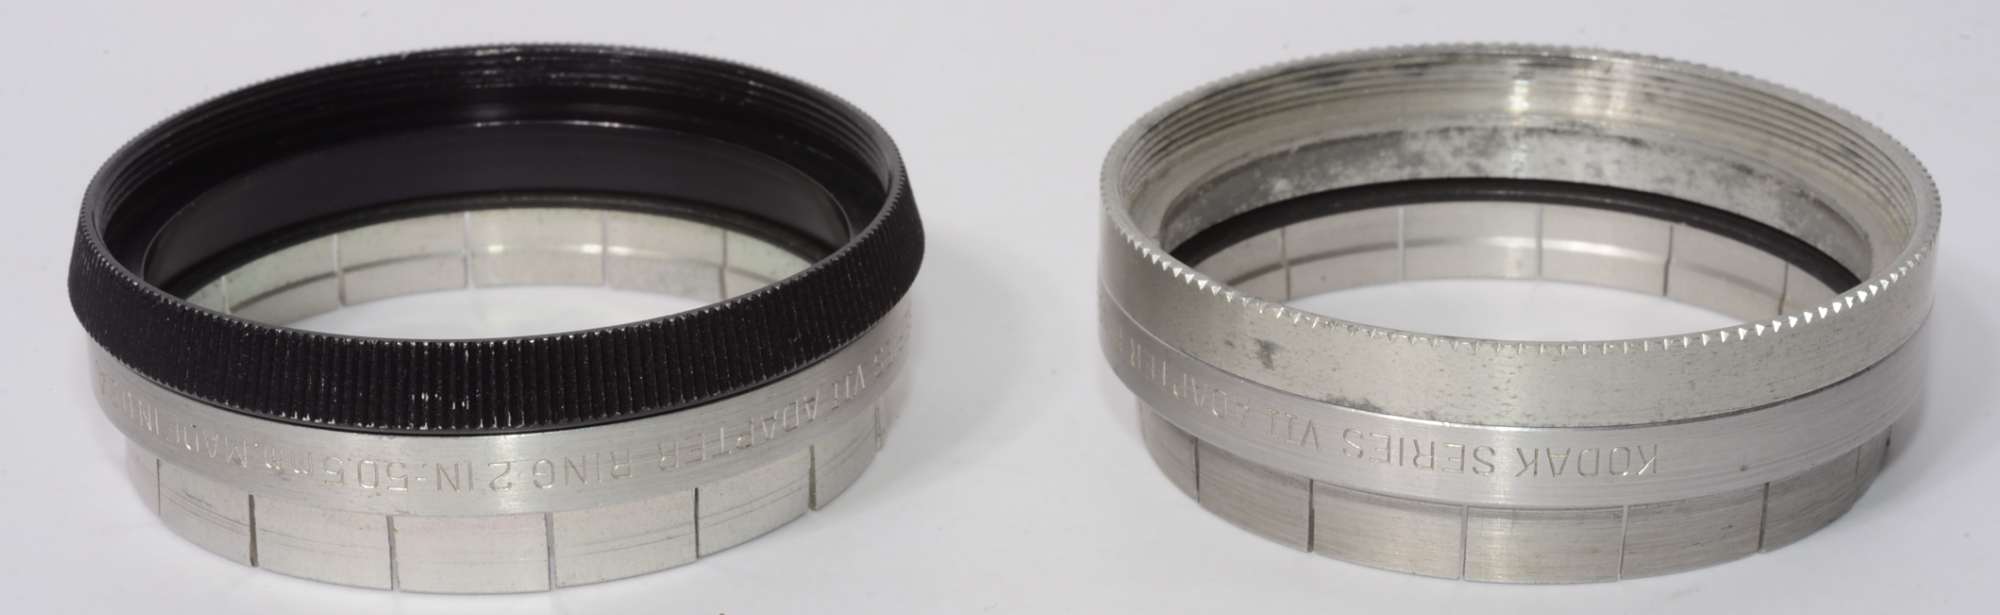 Slip-On  Adapter with a Retaining Ring Kodak Series VIII 60 mm-2 3/8 in 